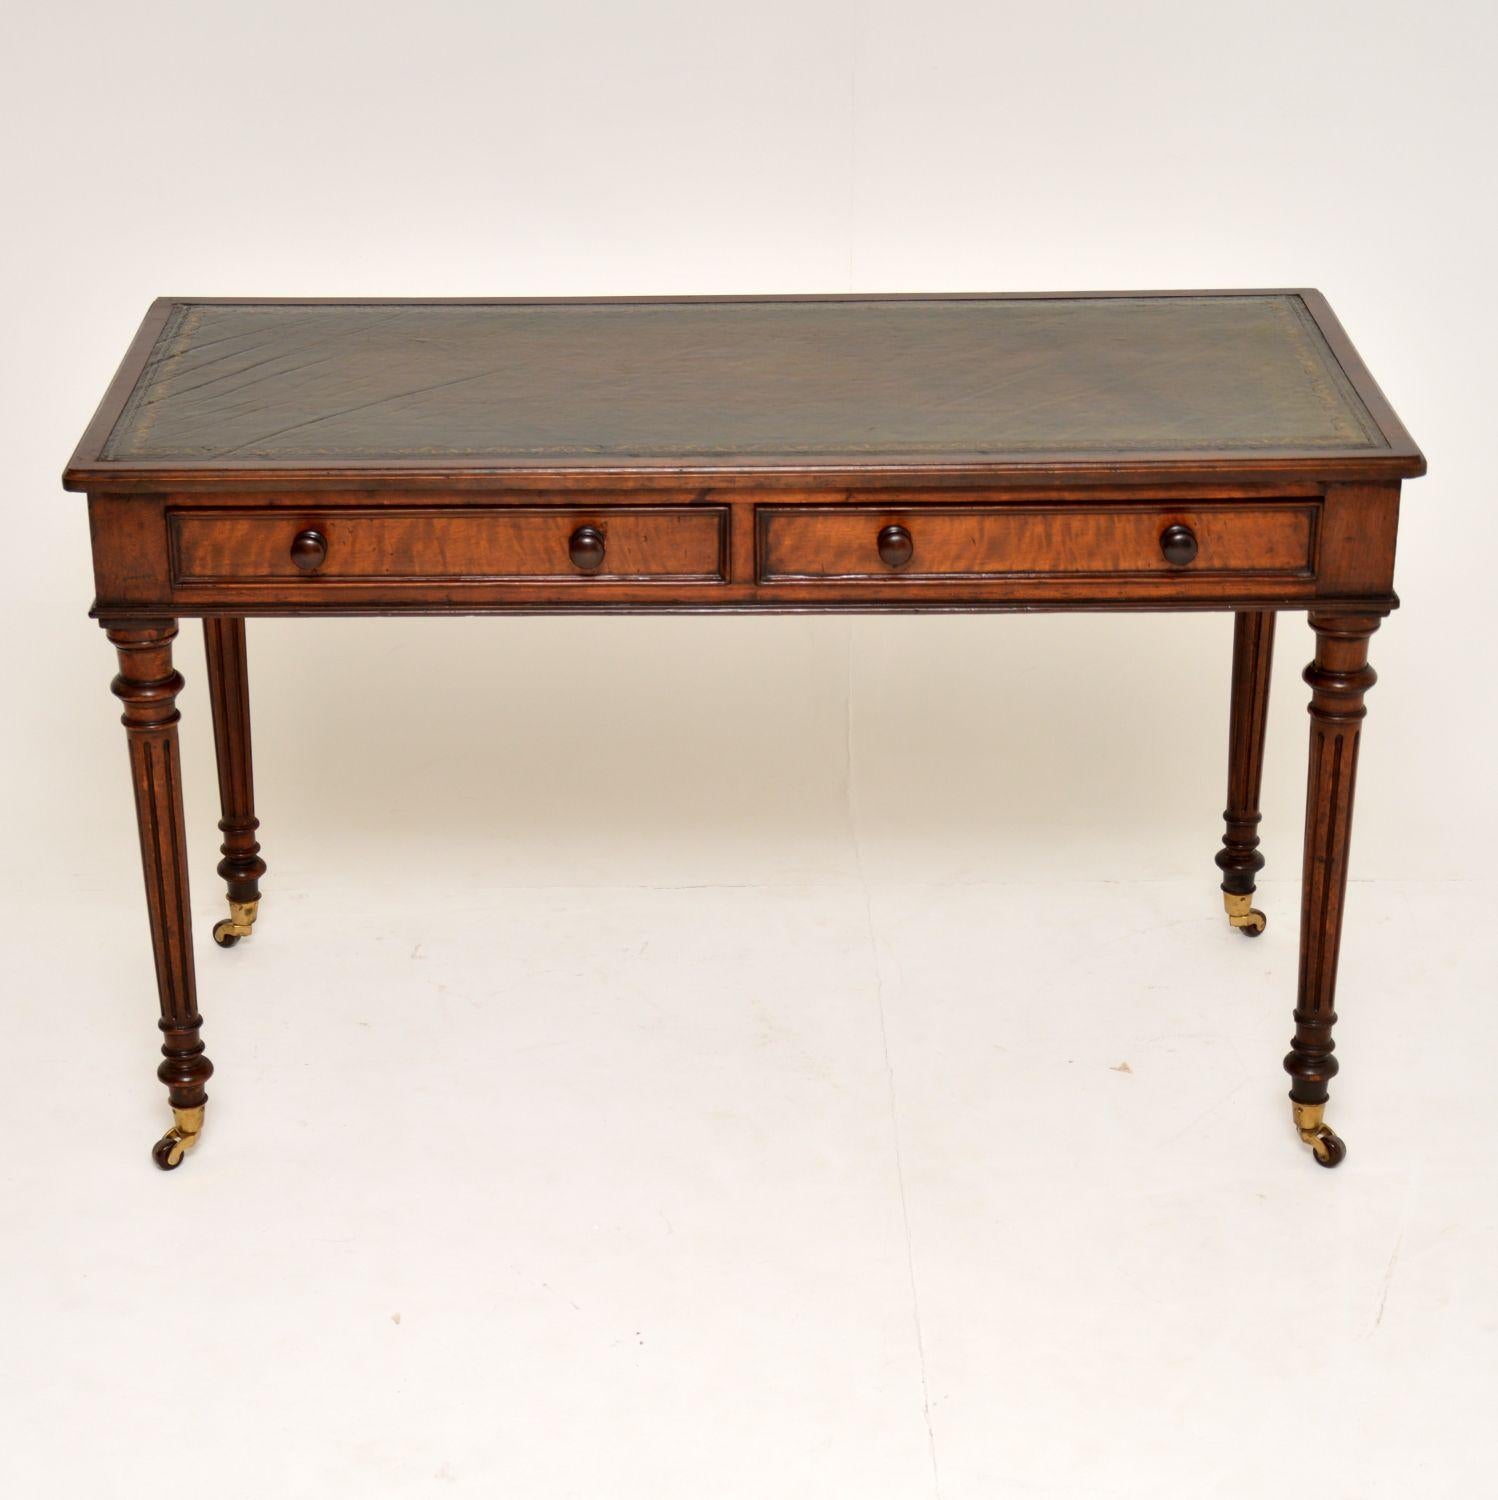 This antique early Victorian mahogany writing table is in very good condition and is full of character, with a nice patina. It has the look of a ‘Gillows’ piece with the elegant proportions and reeded turned legs on brass cupped porcelain casters.